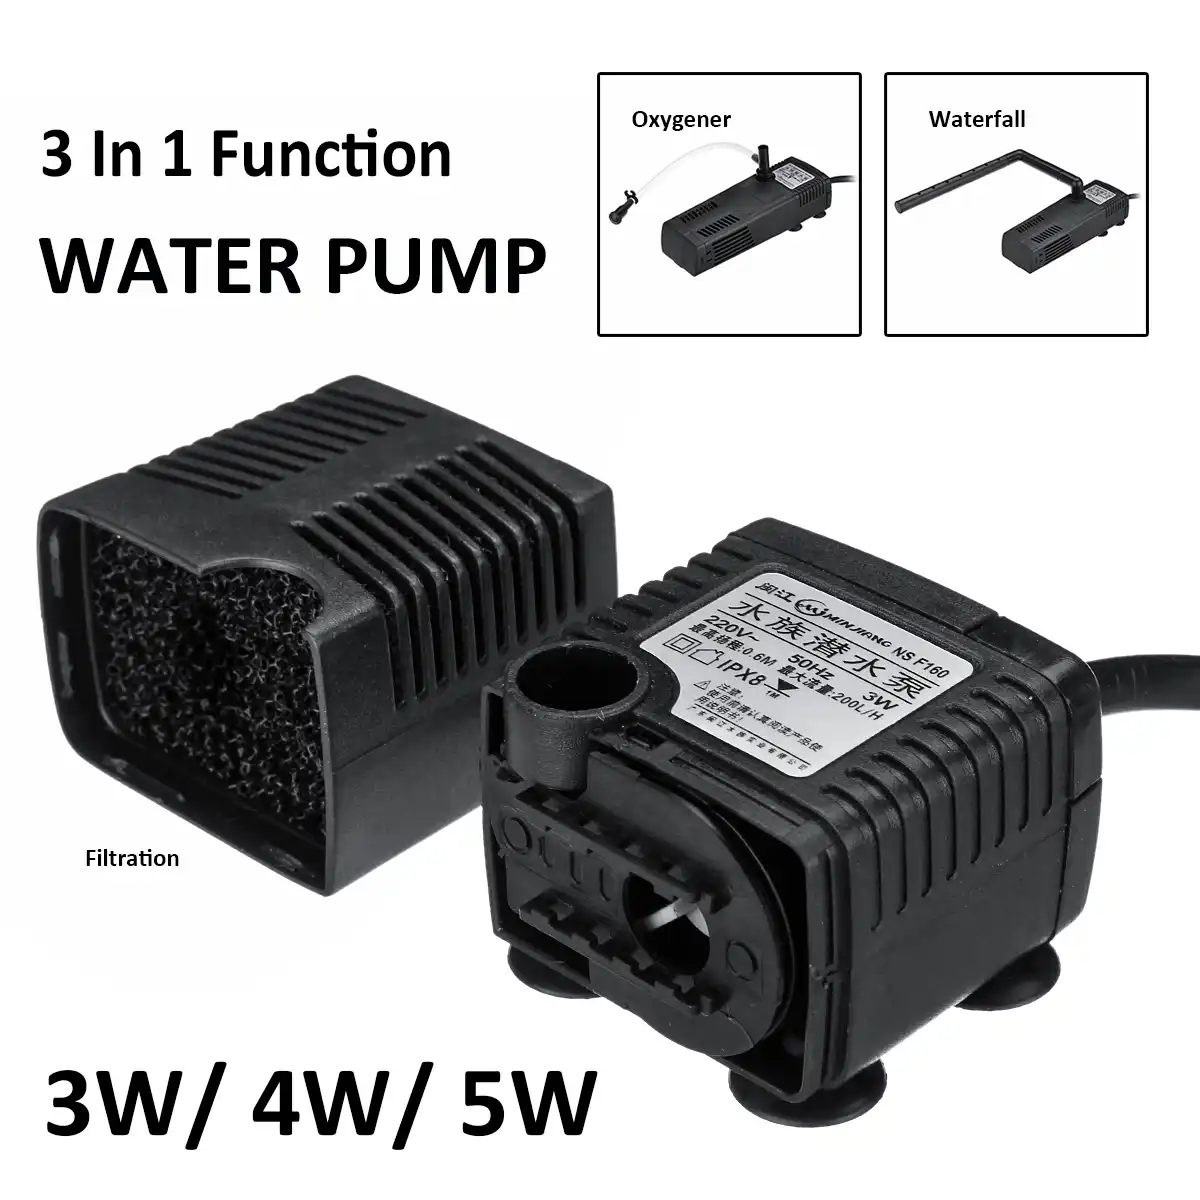 5W Small Pump for Water Fish Tank Electric Water Pump With 700L//H Flow 110V//220V